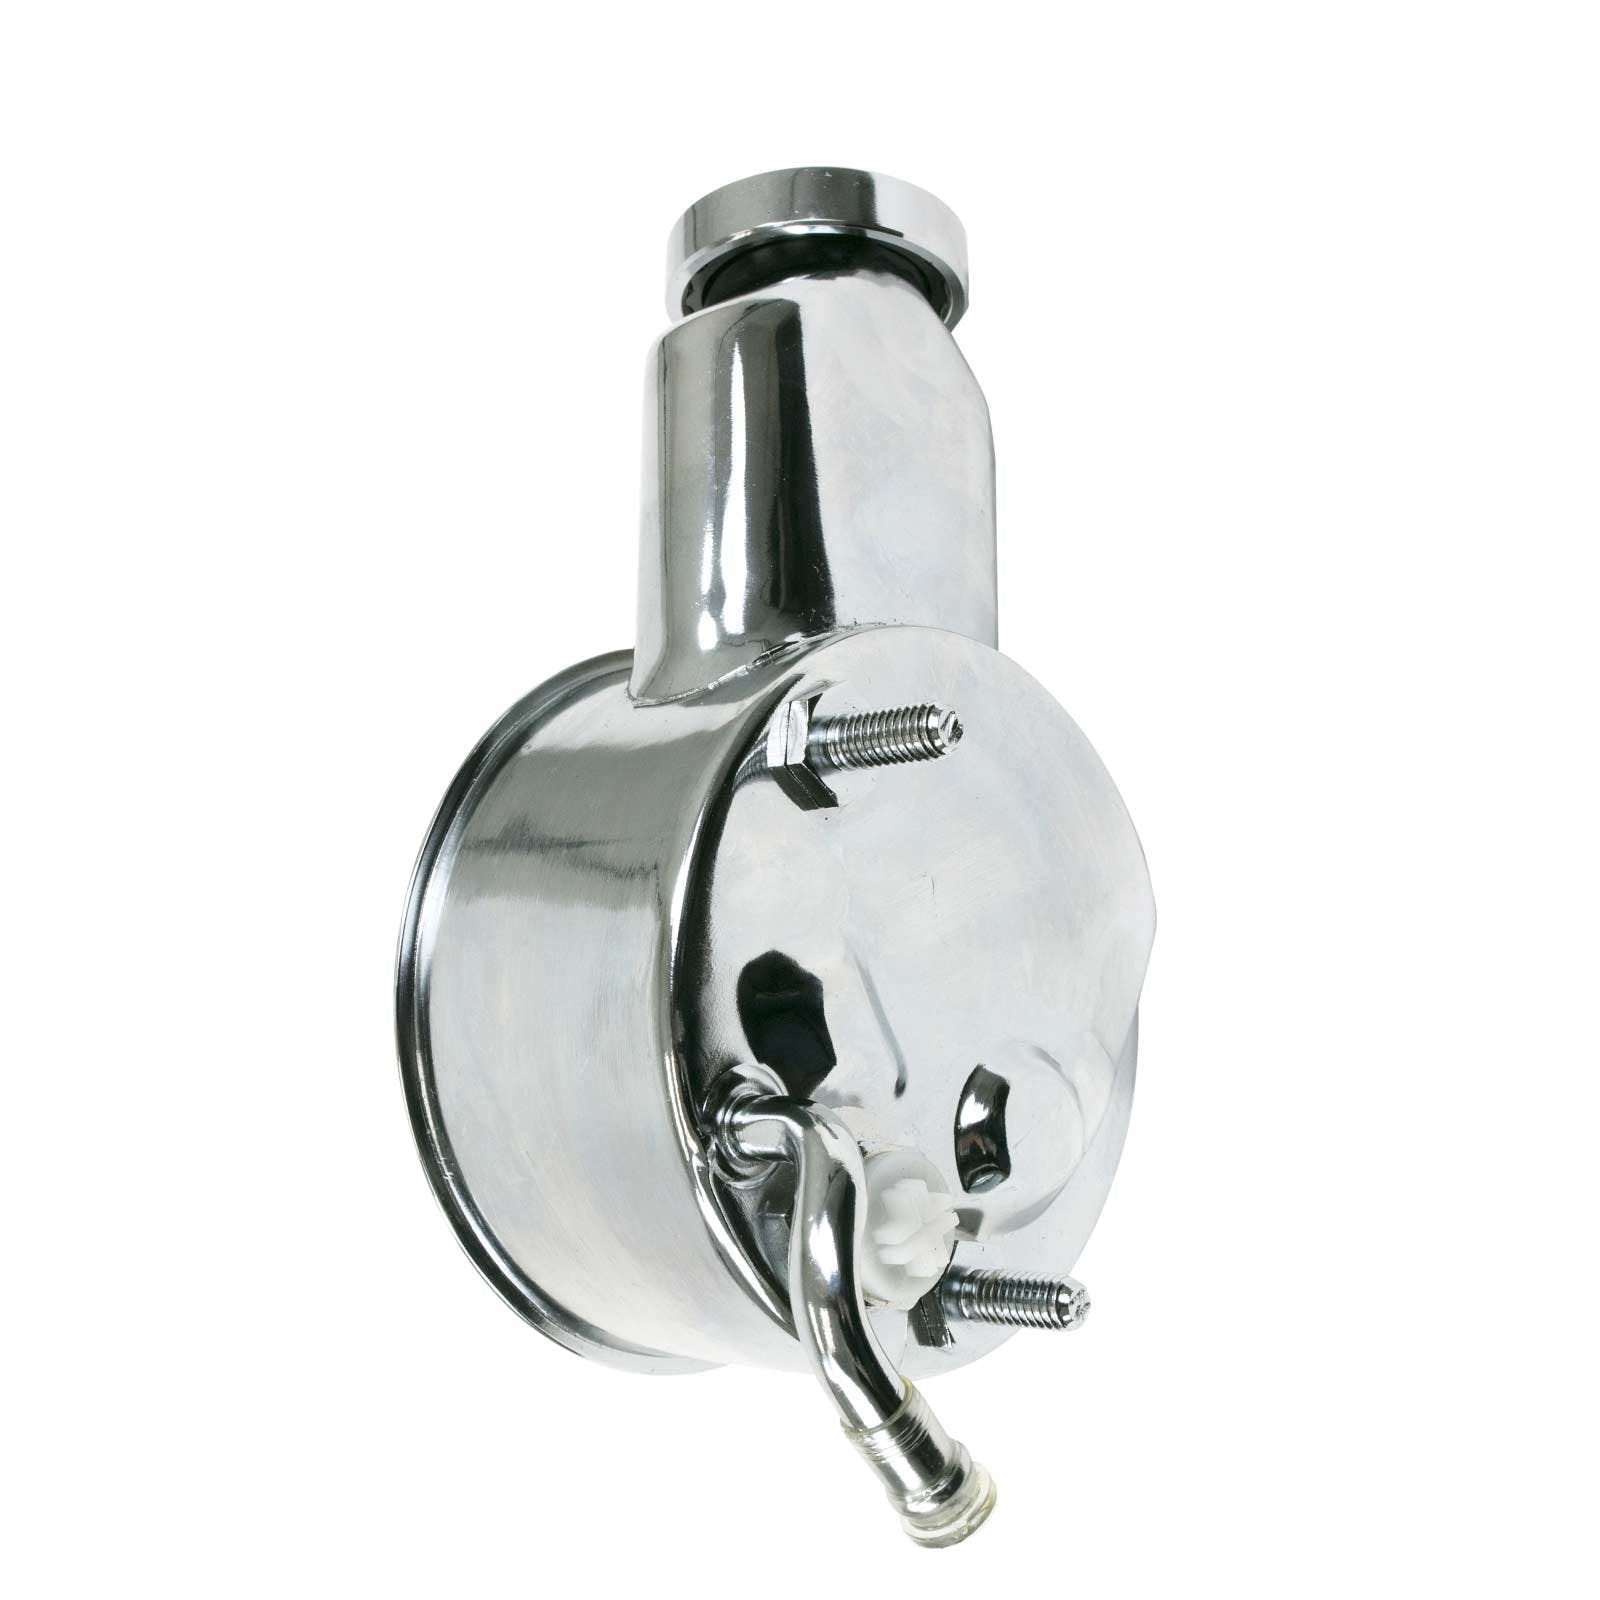 Top Street Performance JM2003C GM Early Saginaw Power Steering Pump With Billet Aluminum Cap and Dipstick, Chrome